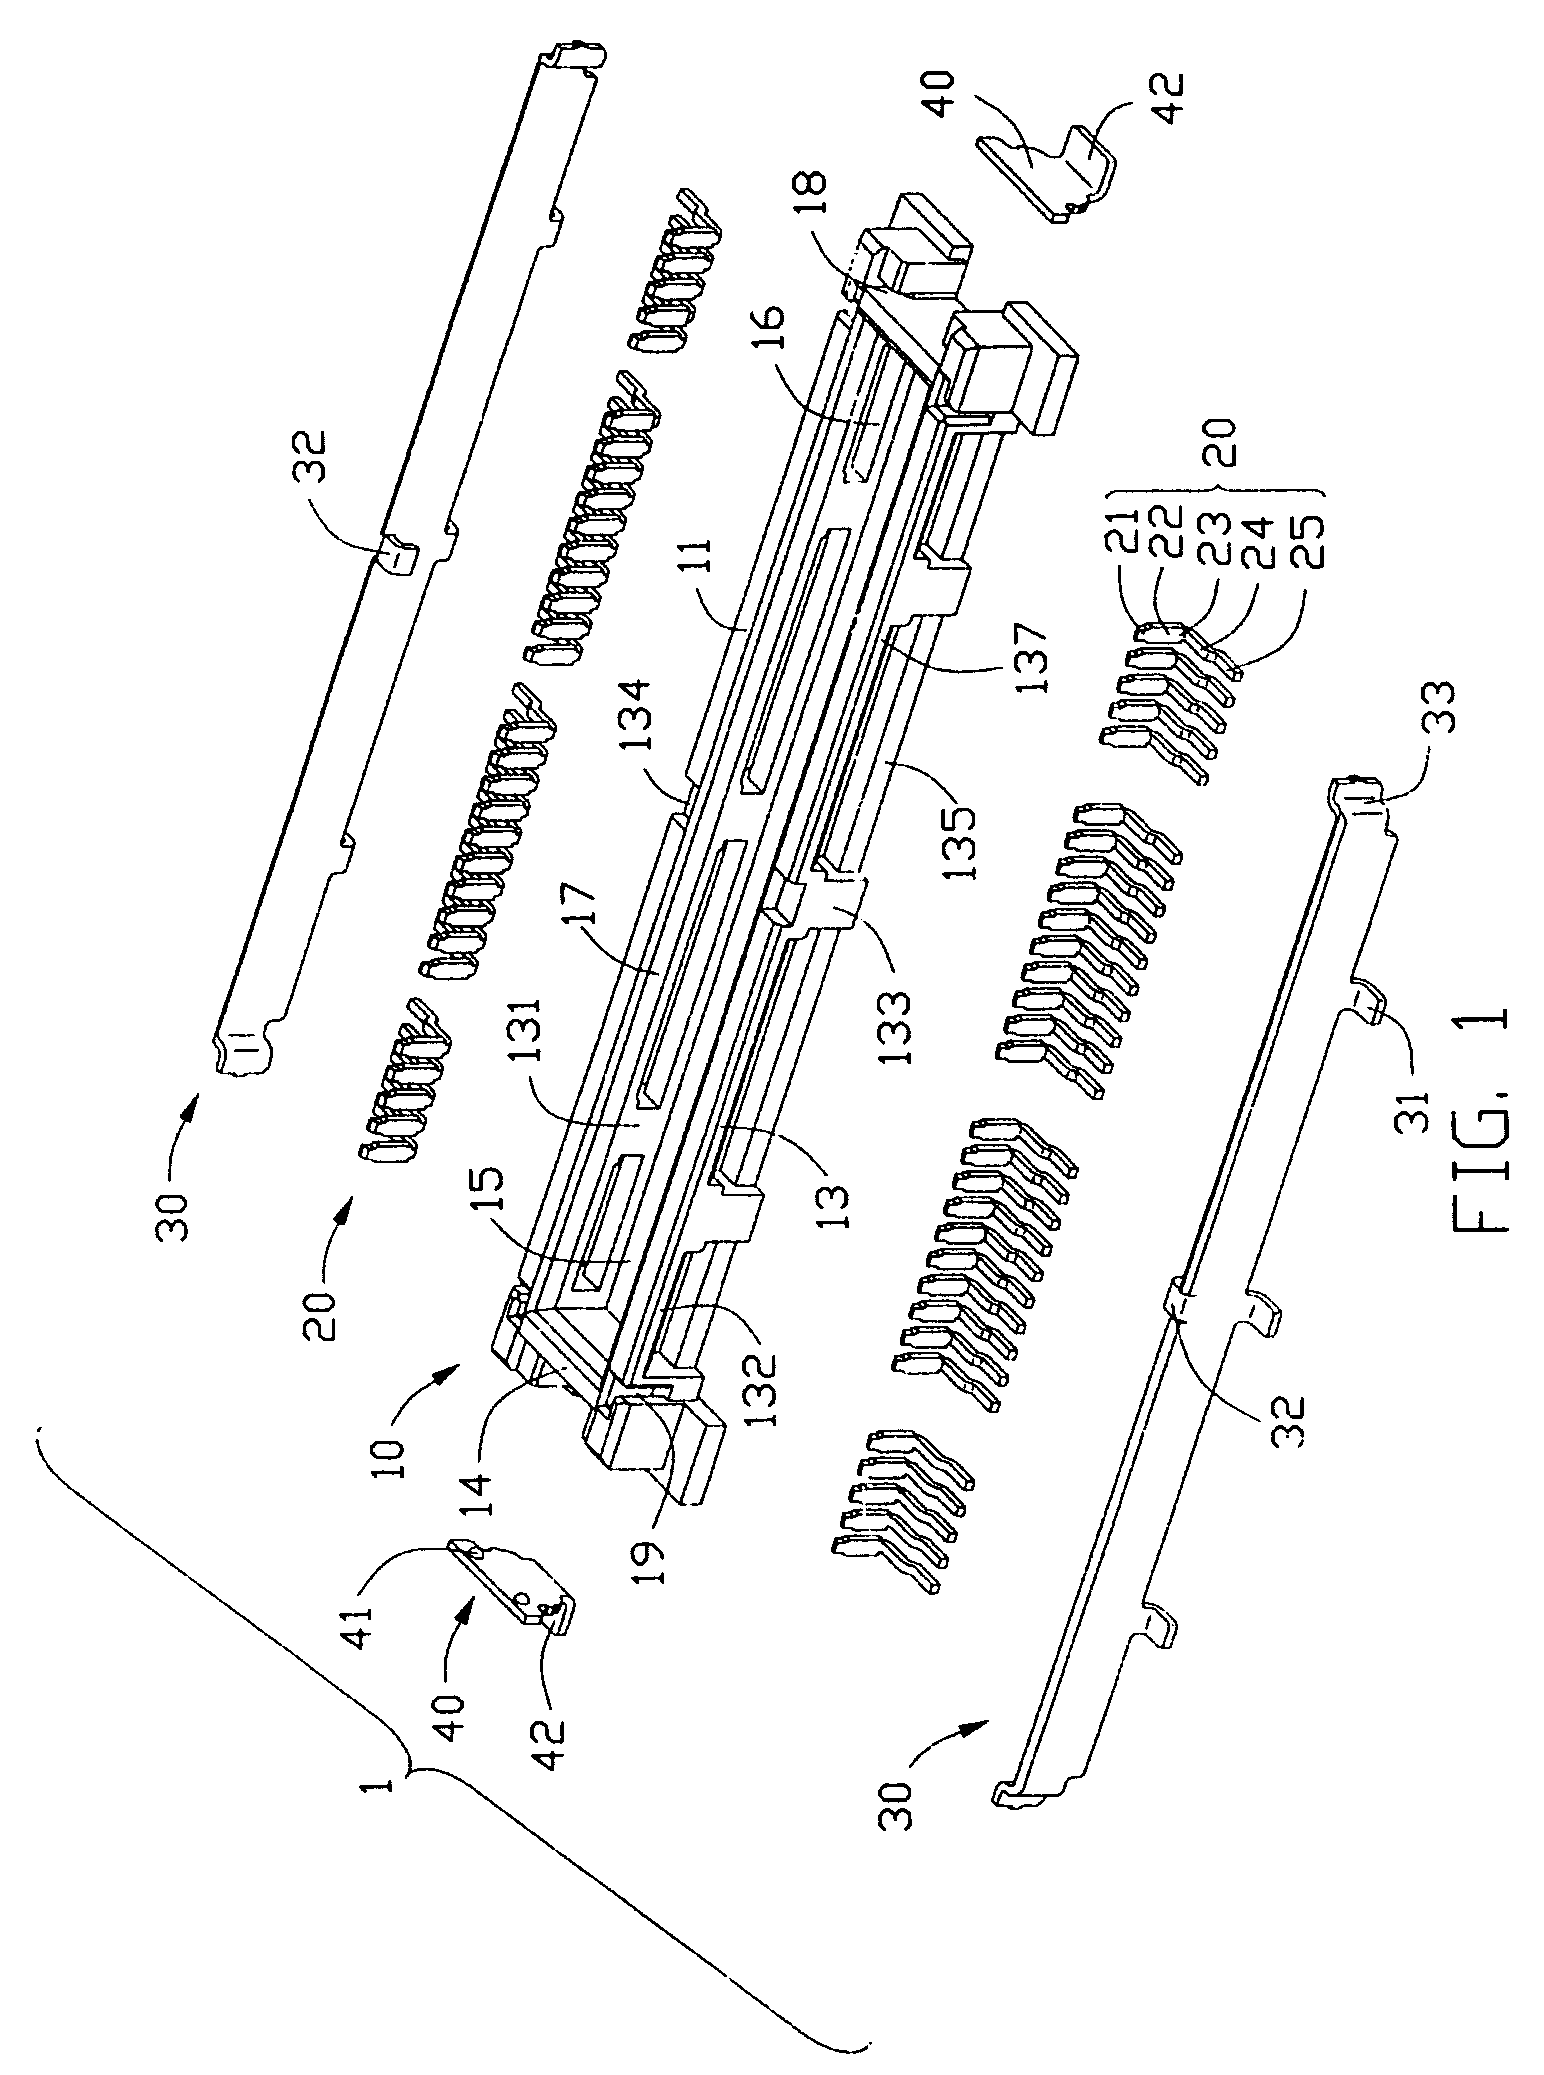 Electrical connector with guidance face